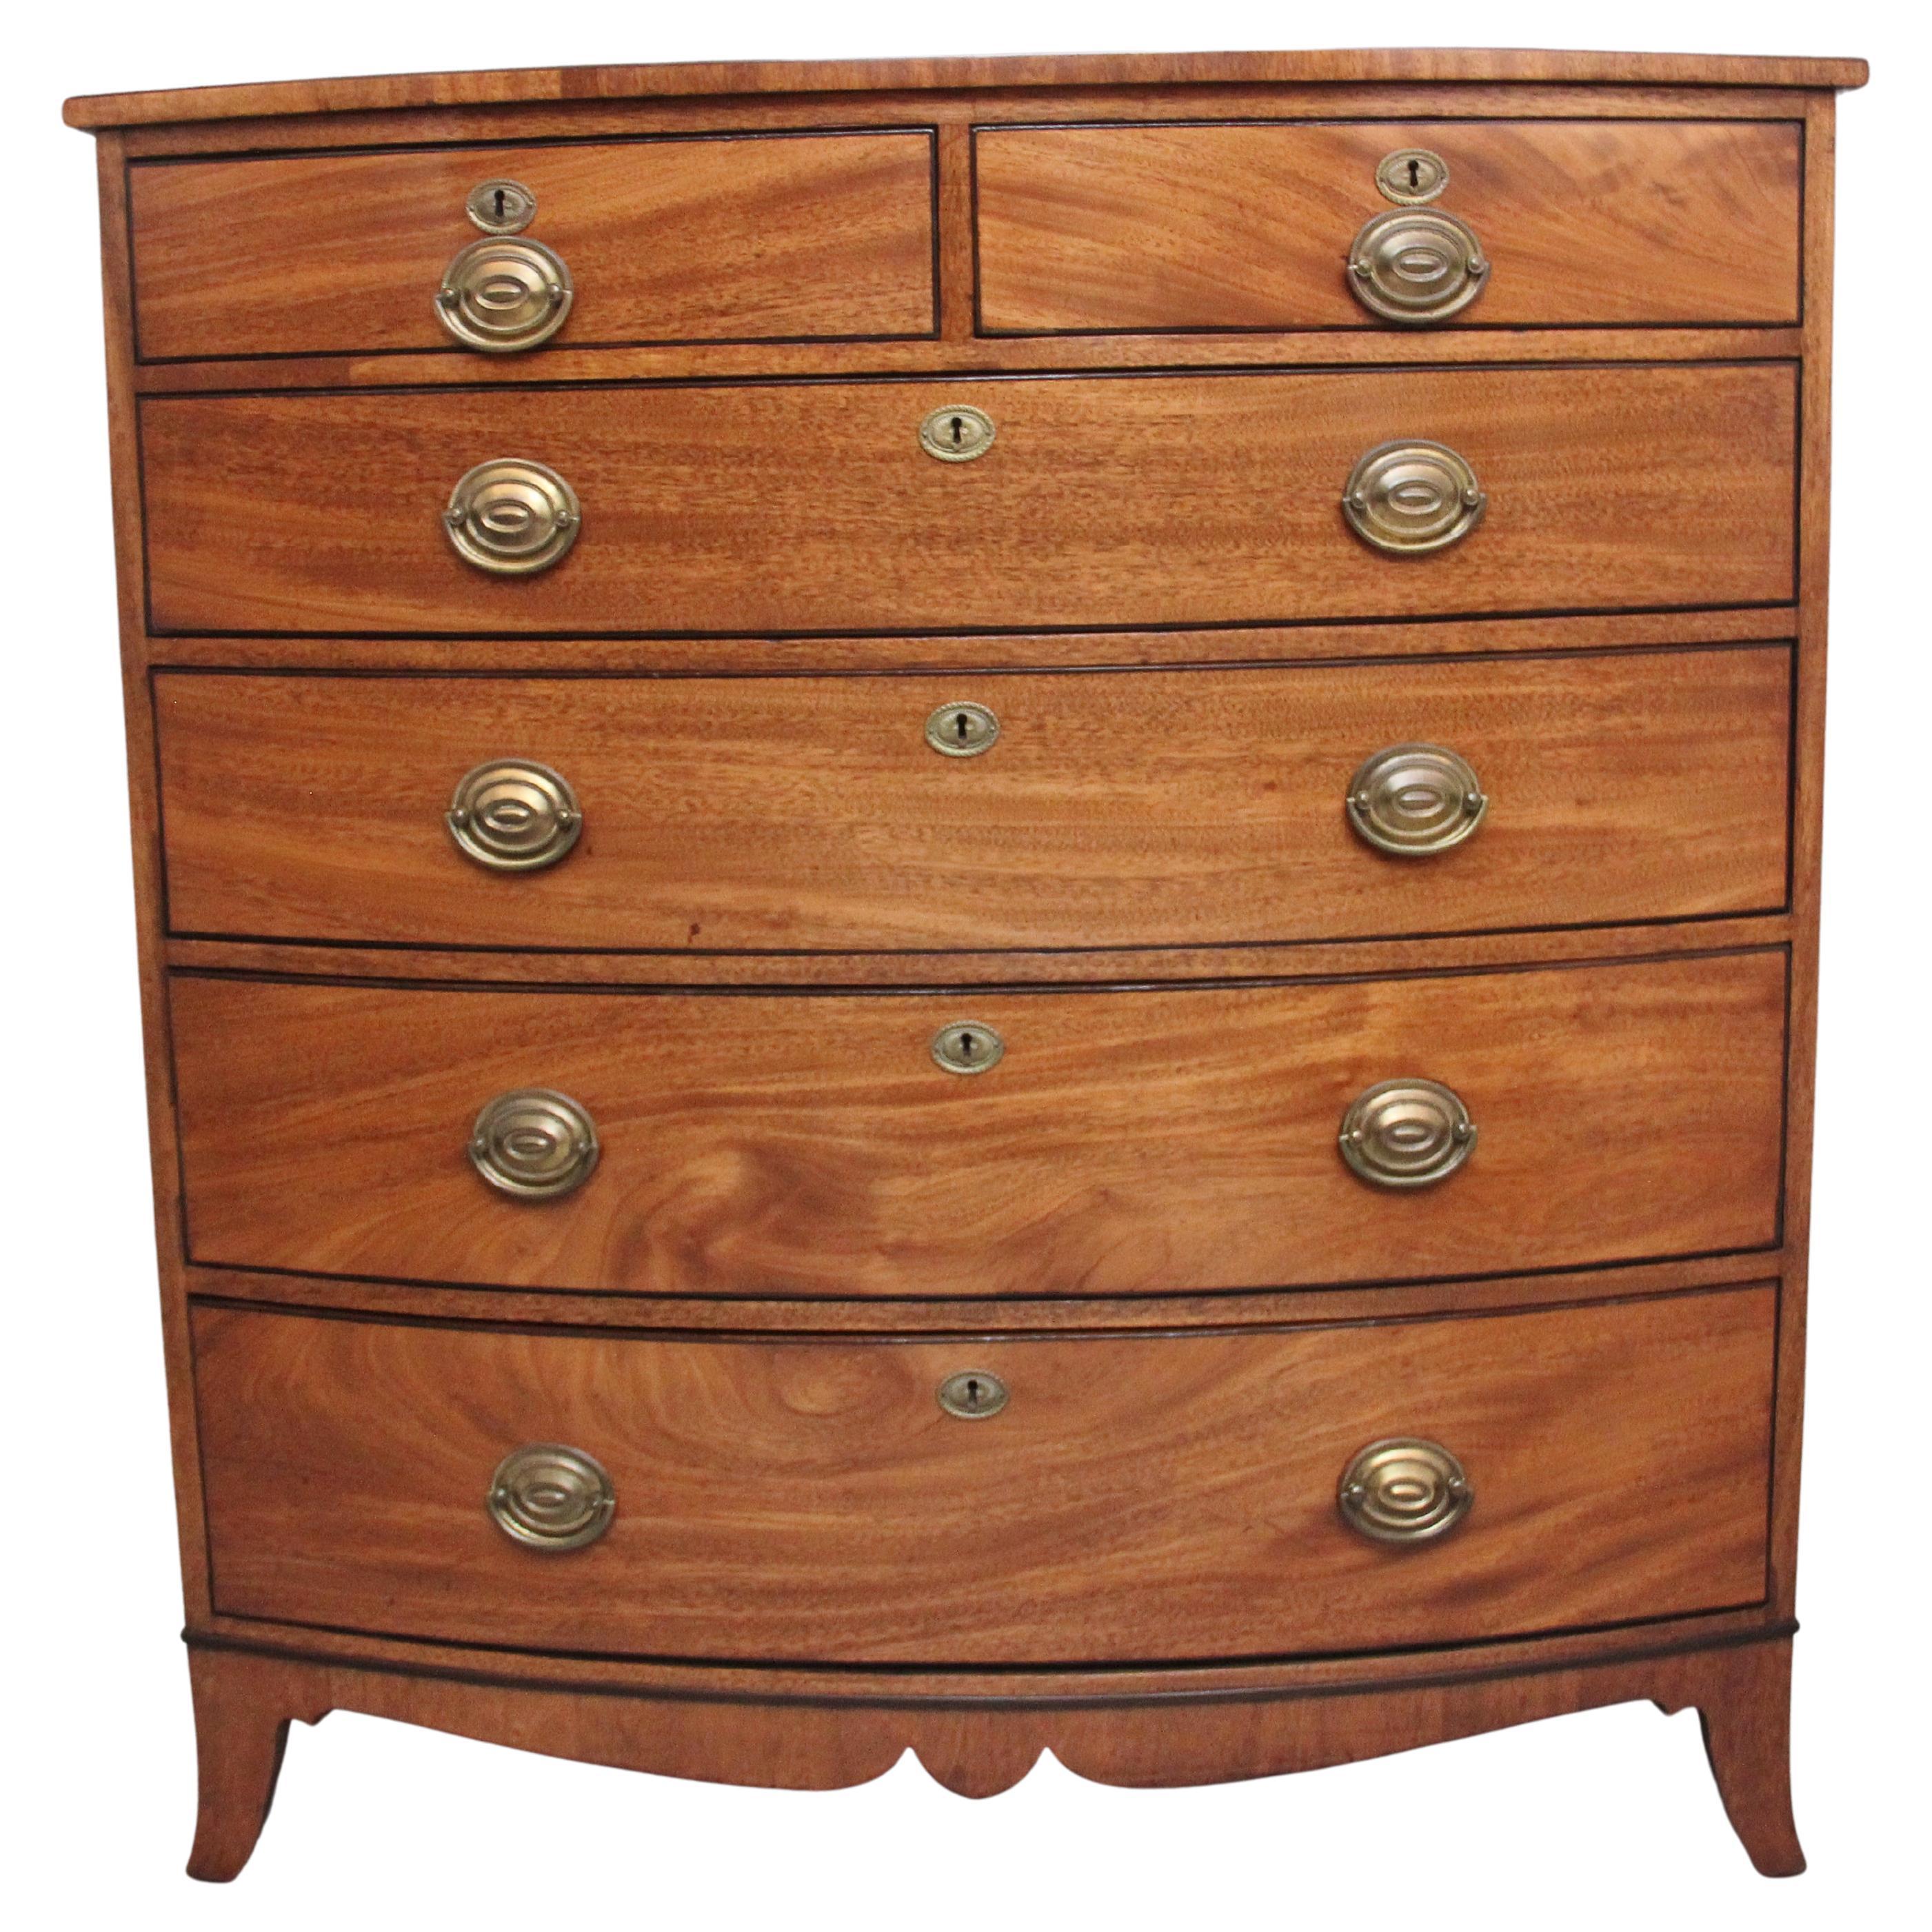 Superb Quality Early 19th Century Tall Mahogany Bowfront Chest of Drawers